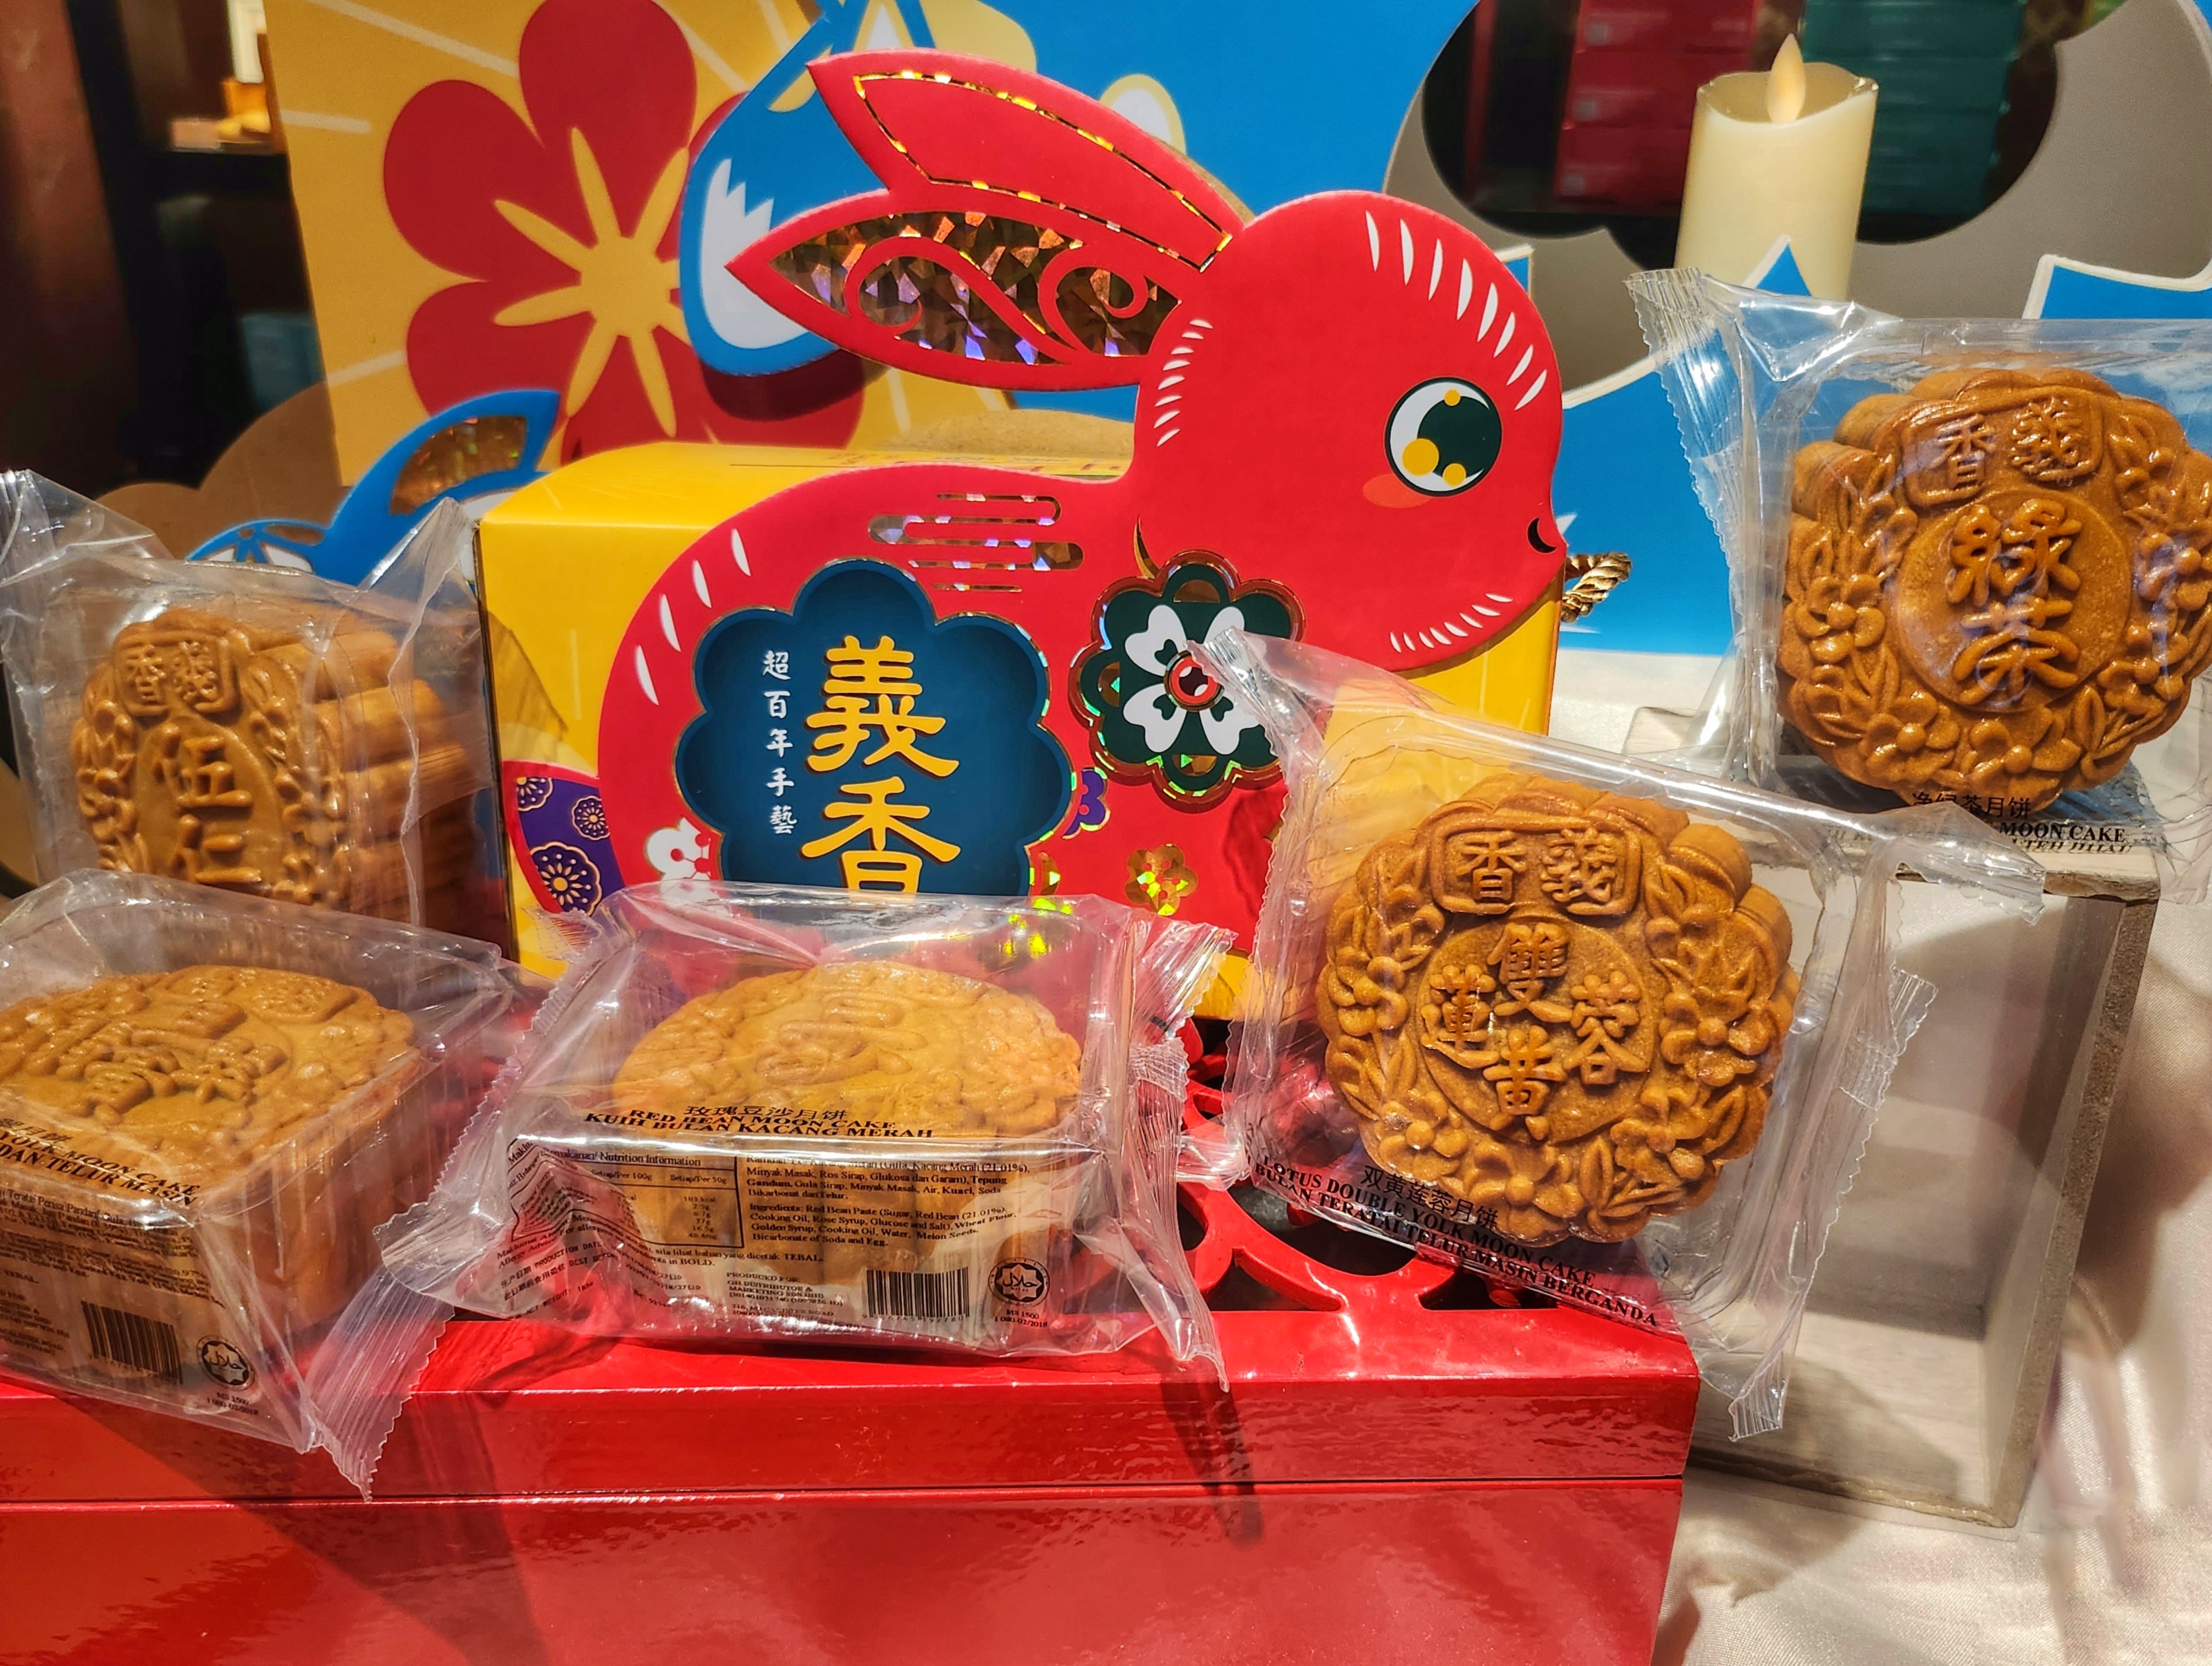 Ghee Hiang Mid-Autumn Mooncake Packaging to Revive and Celebrate Lantern Culture 